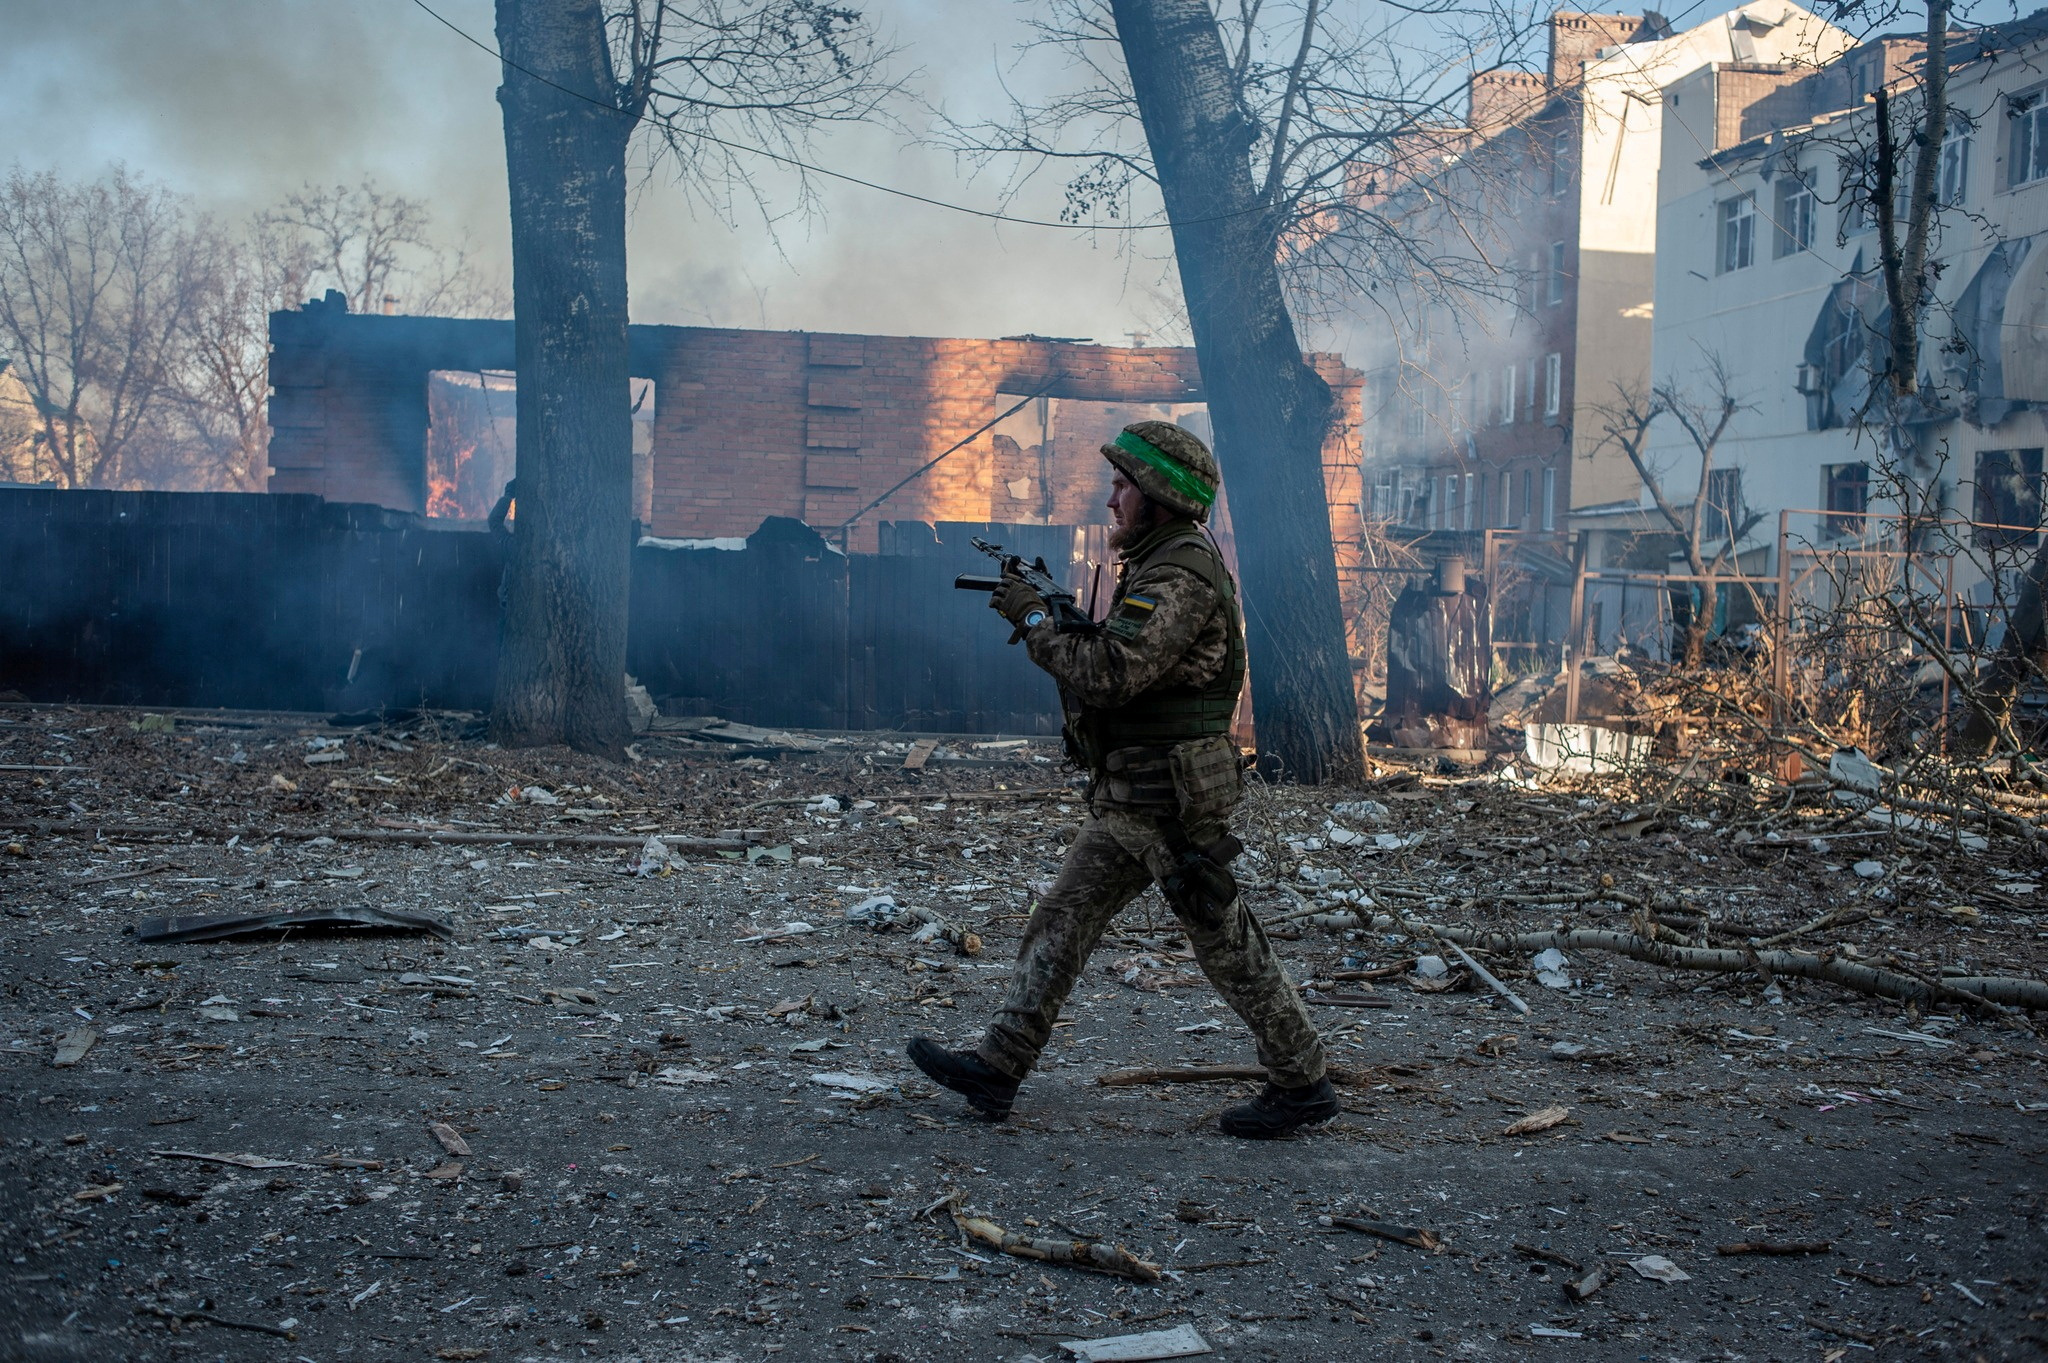 Ukrainian service member walks next to a burning building in the frontline town of Bakhmut